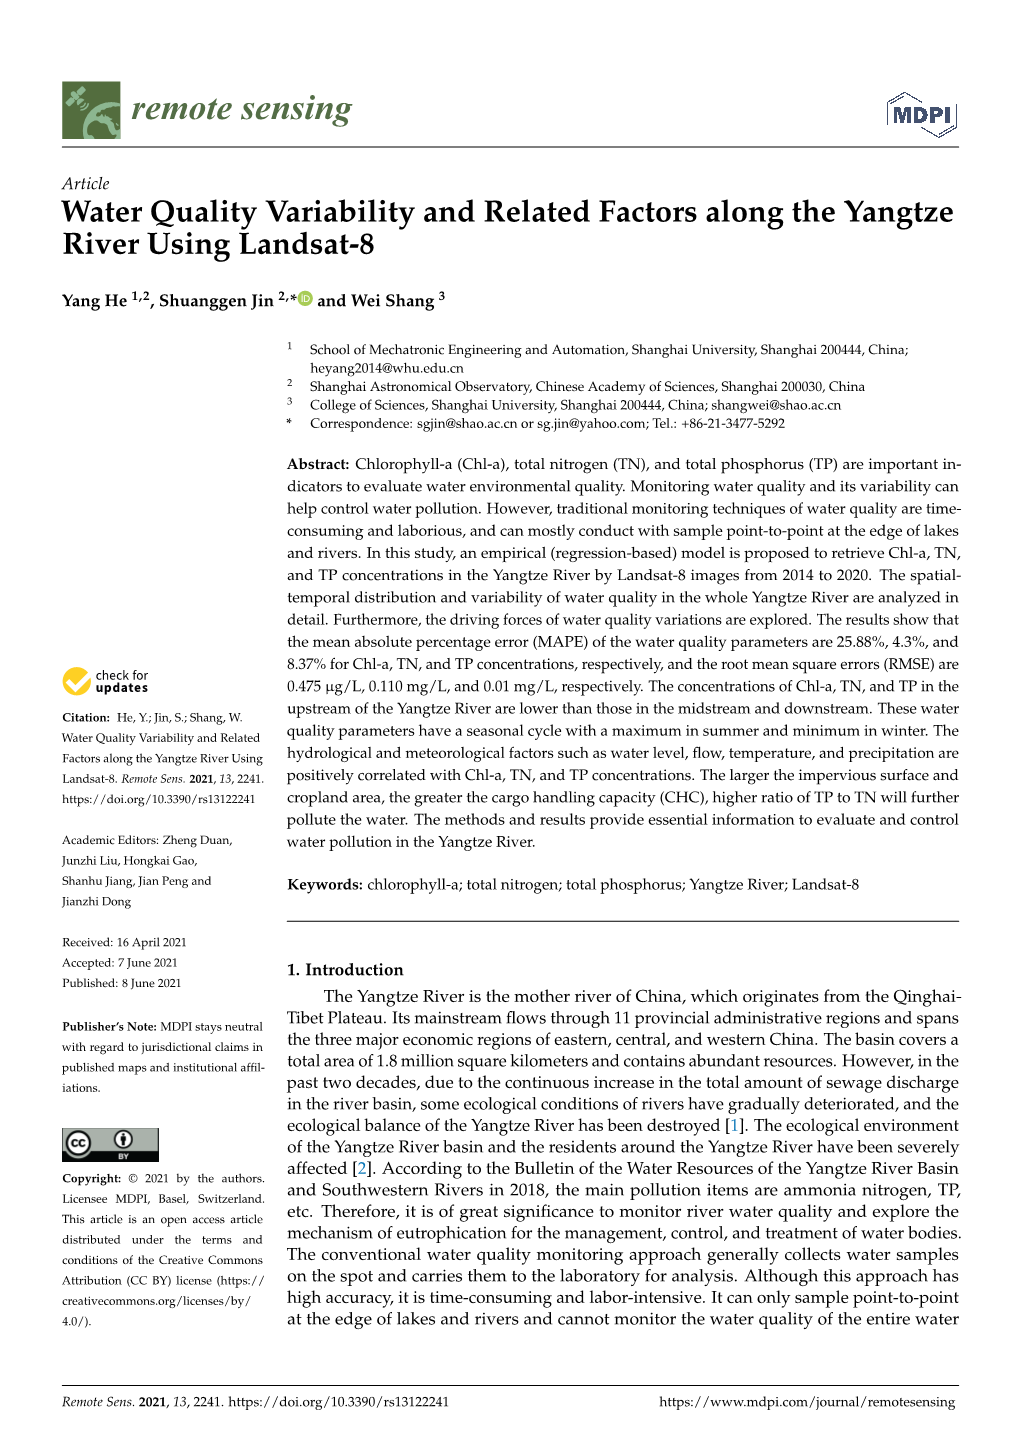 Water Quality Variability and Related Factors Along the Yangtze River Using Landsat-8